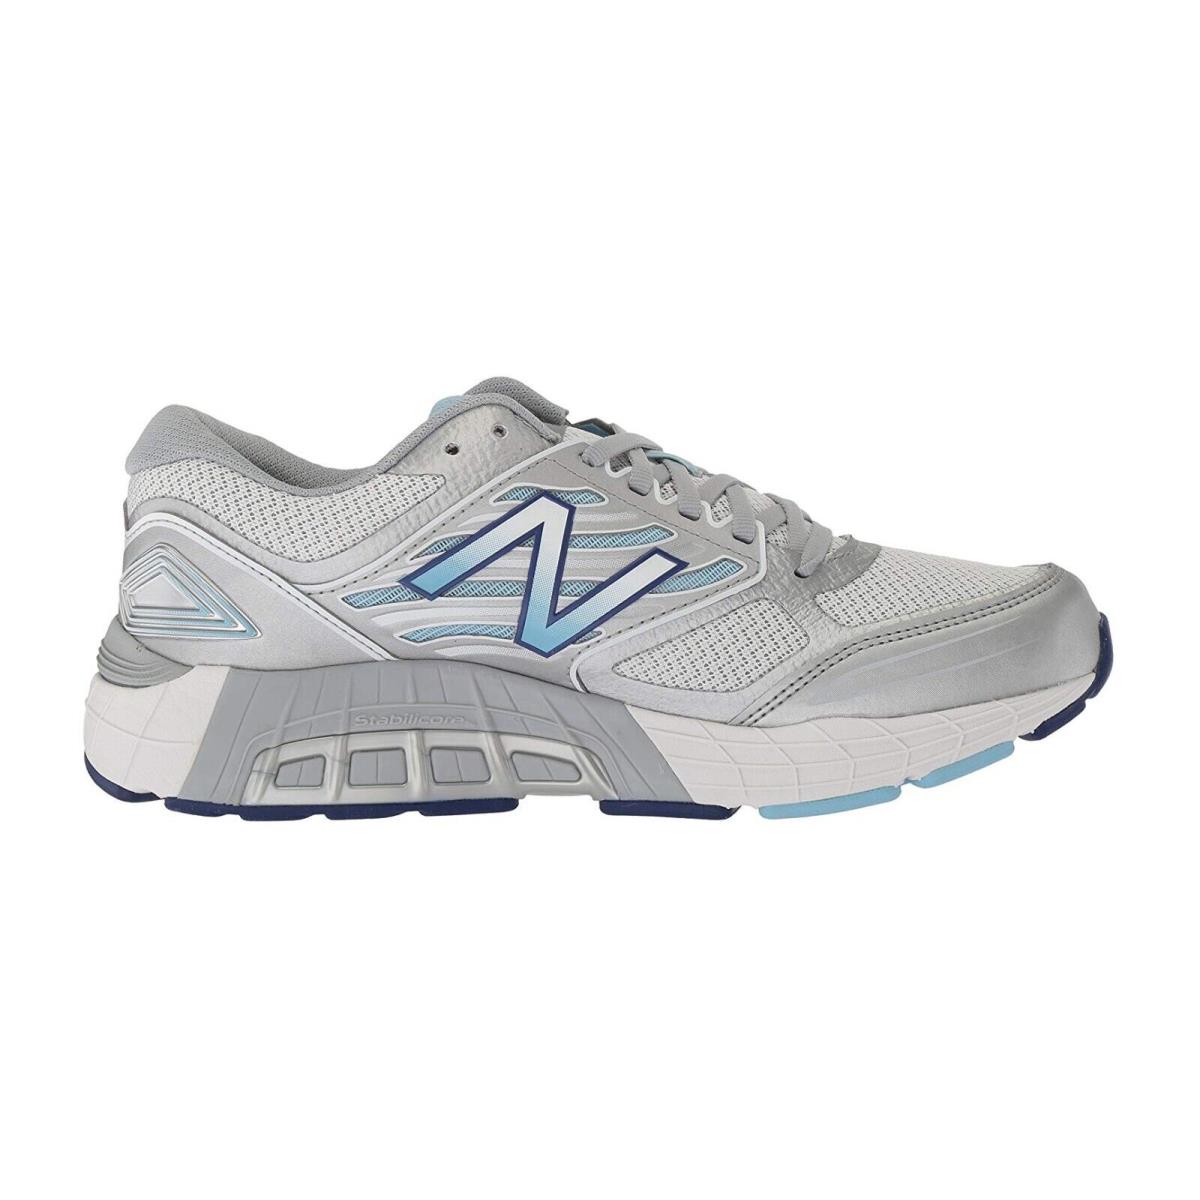 New Balance 1340v3 Women`s Running Shoes Sneakers W1340WP3 - Grey/clear Sky